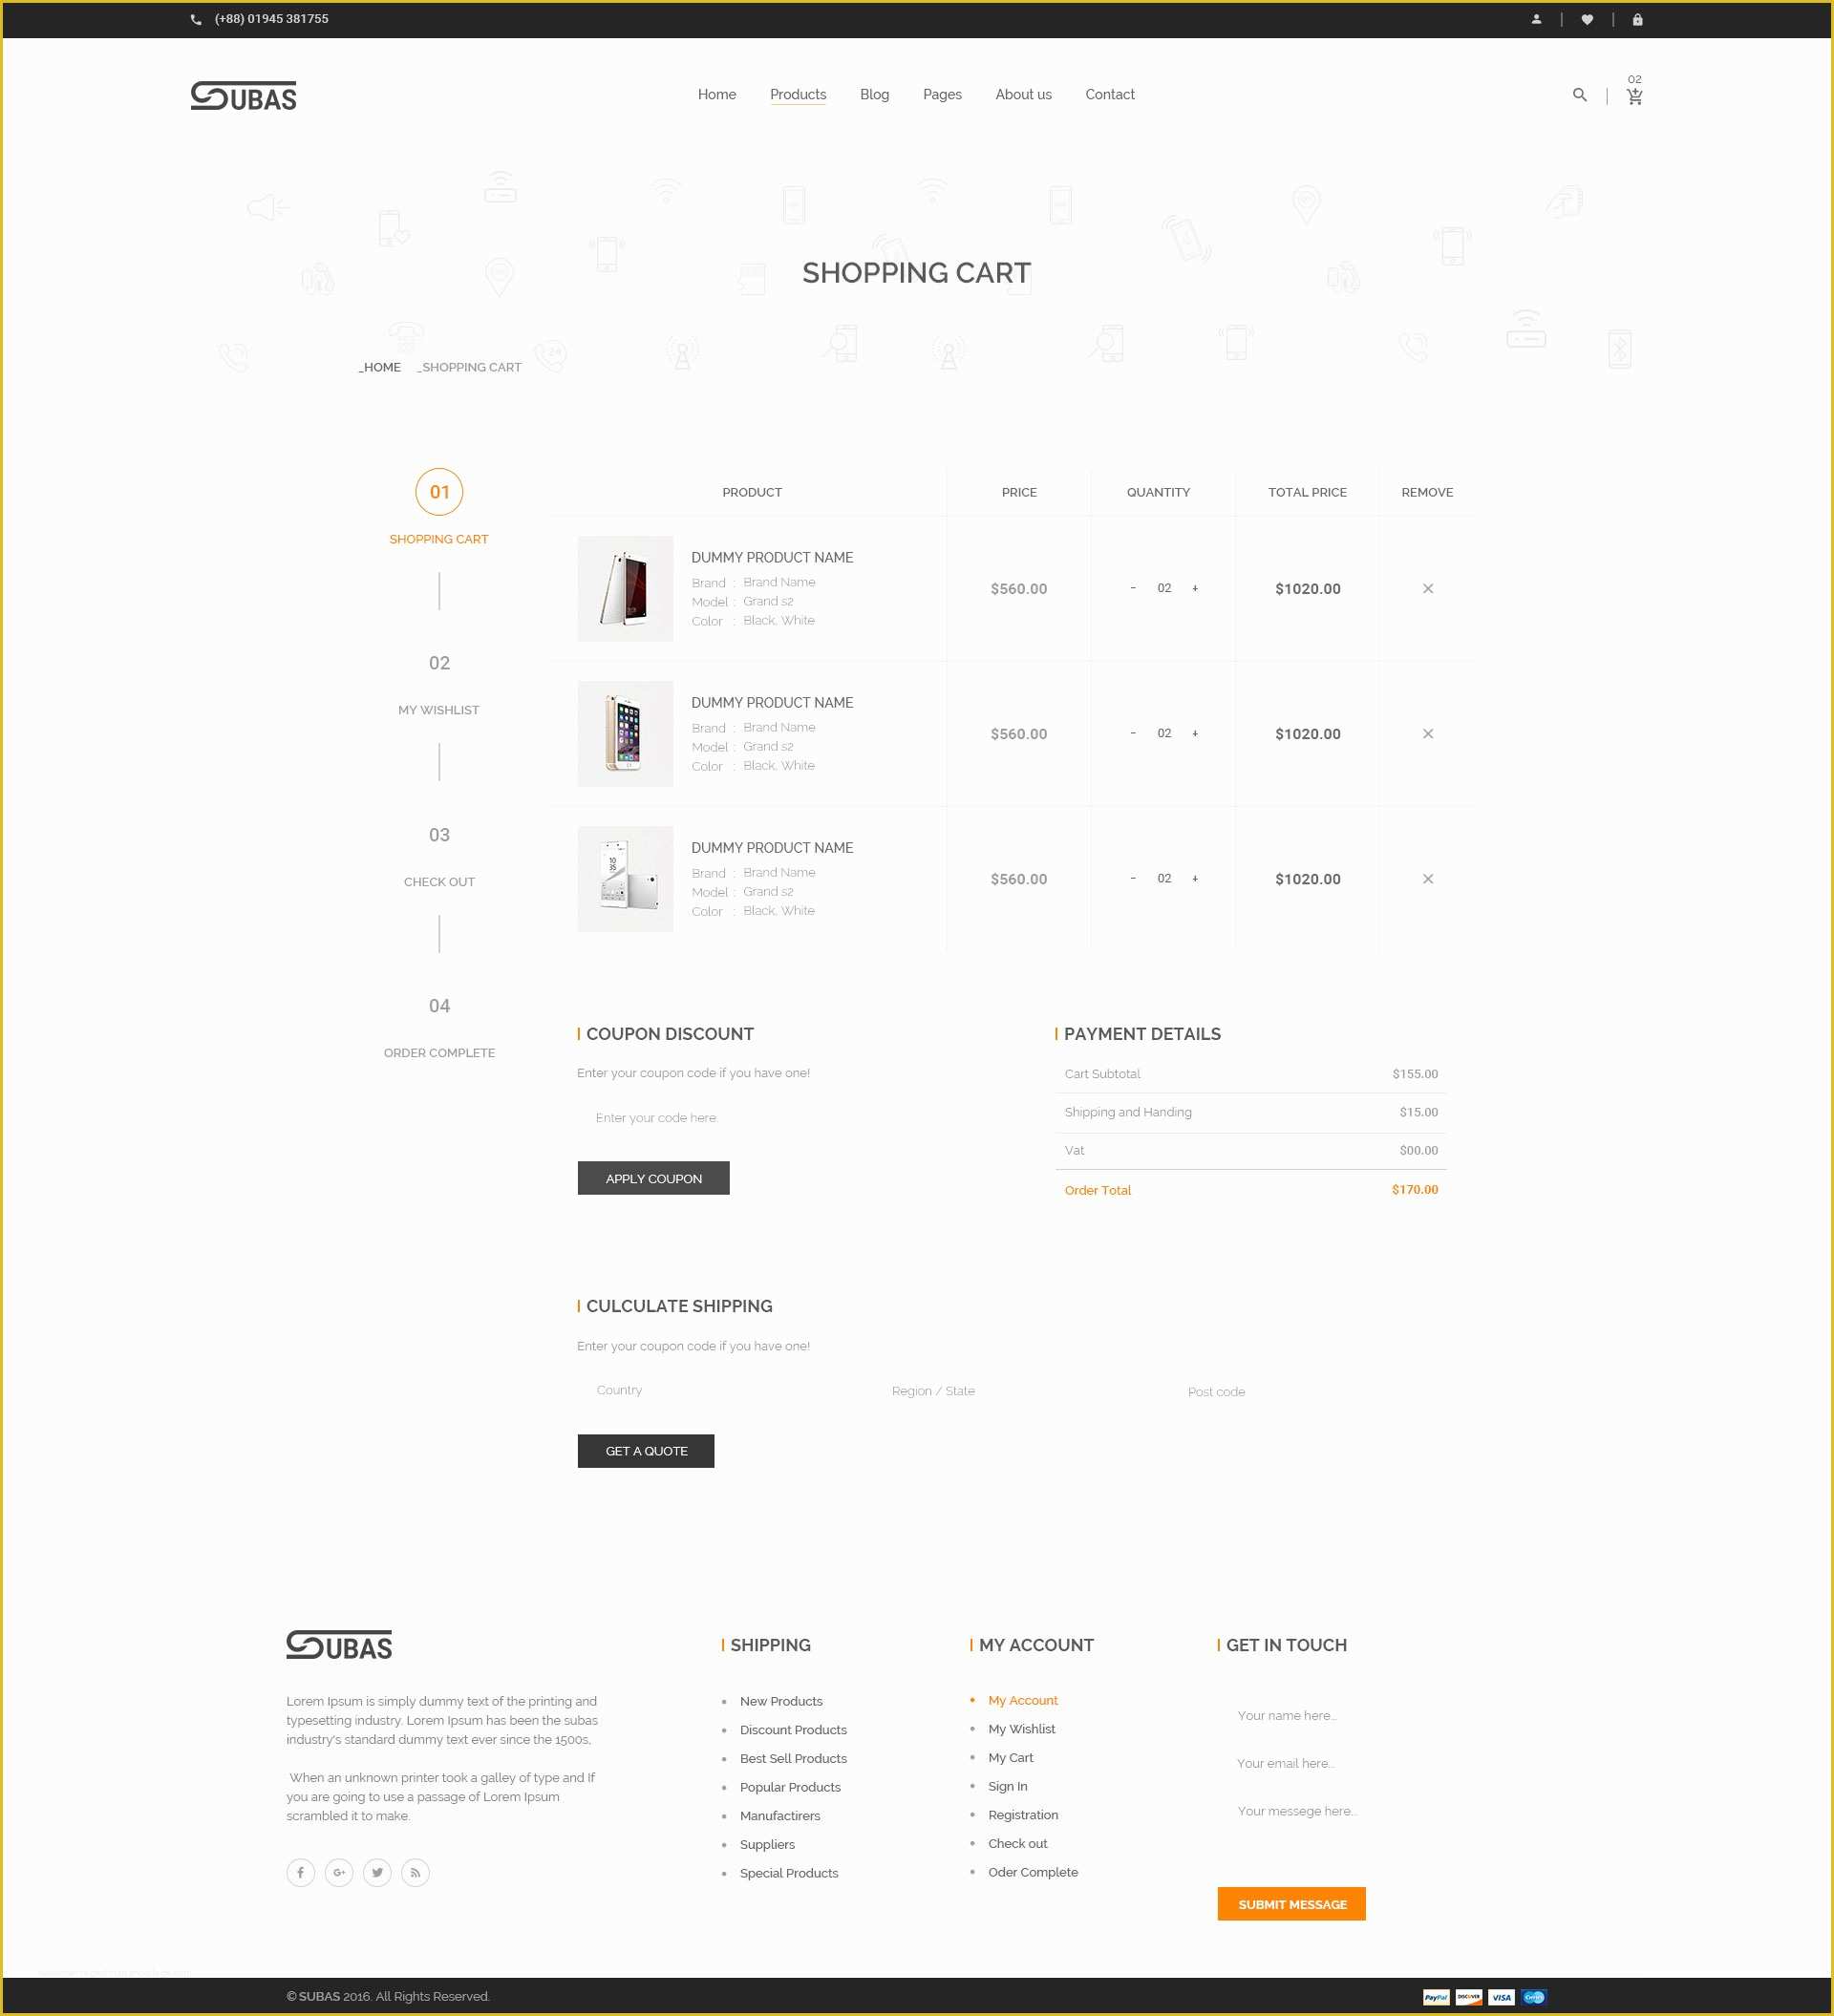 Free Shopping Cart Template for Blogspot Of Subas E Merce Psd Template by Codecarnival